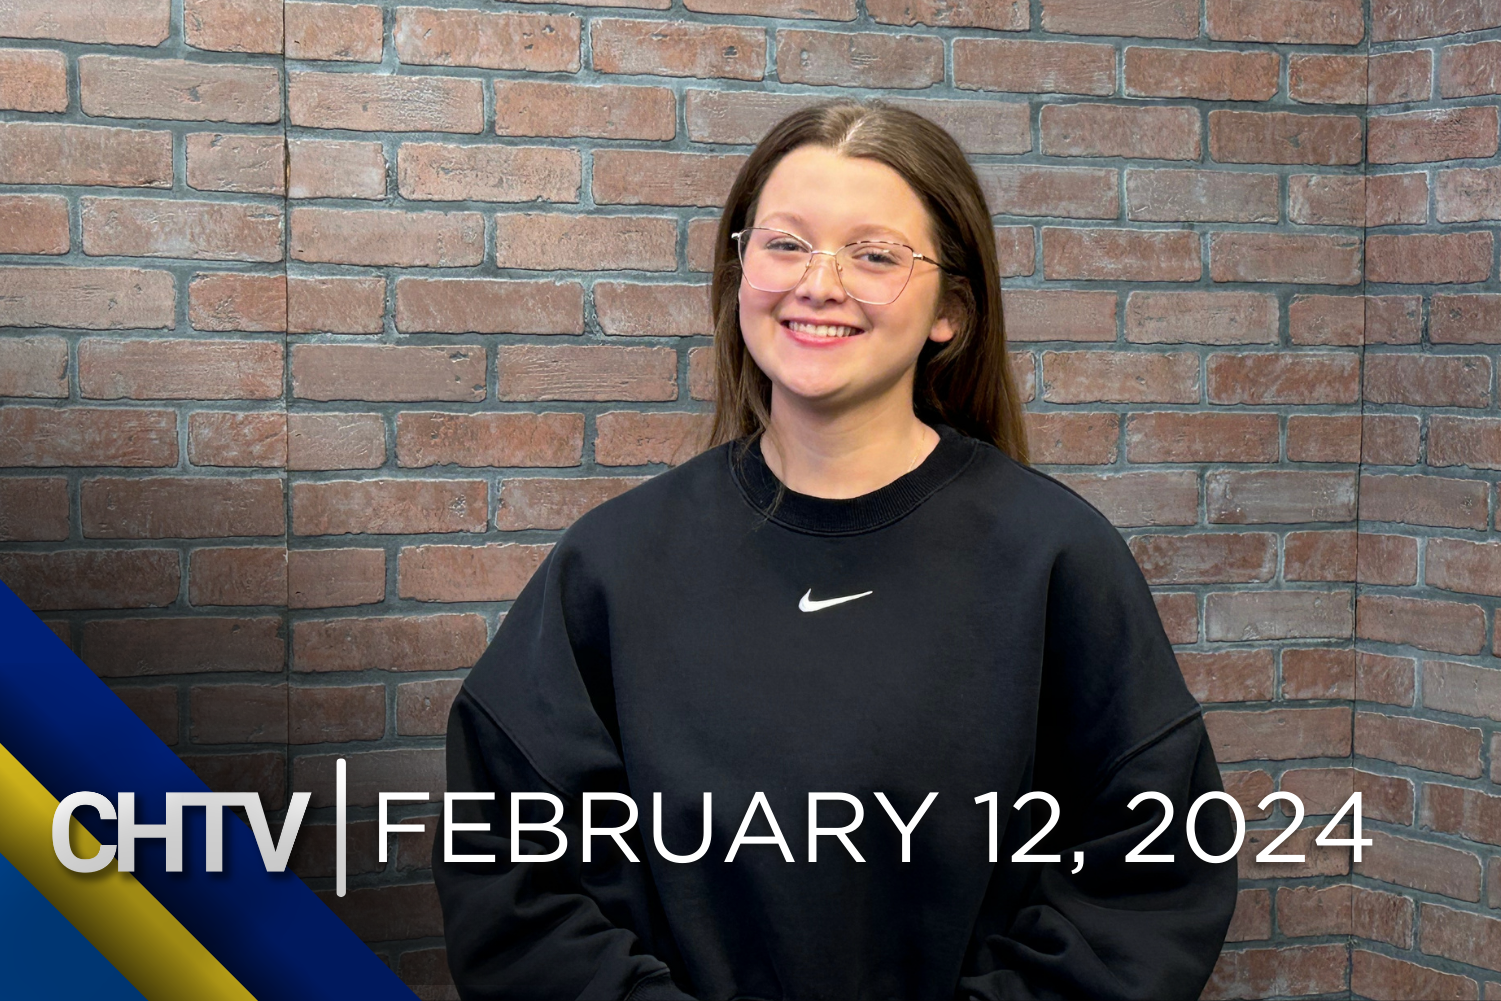 Addy standing at the sports set, with the text CHTV: February 12, 2024 in front of her